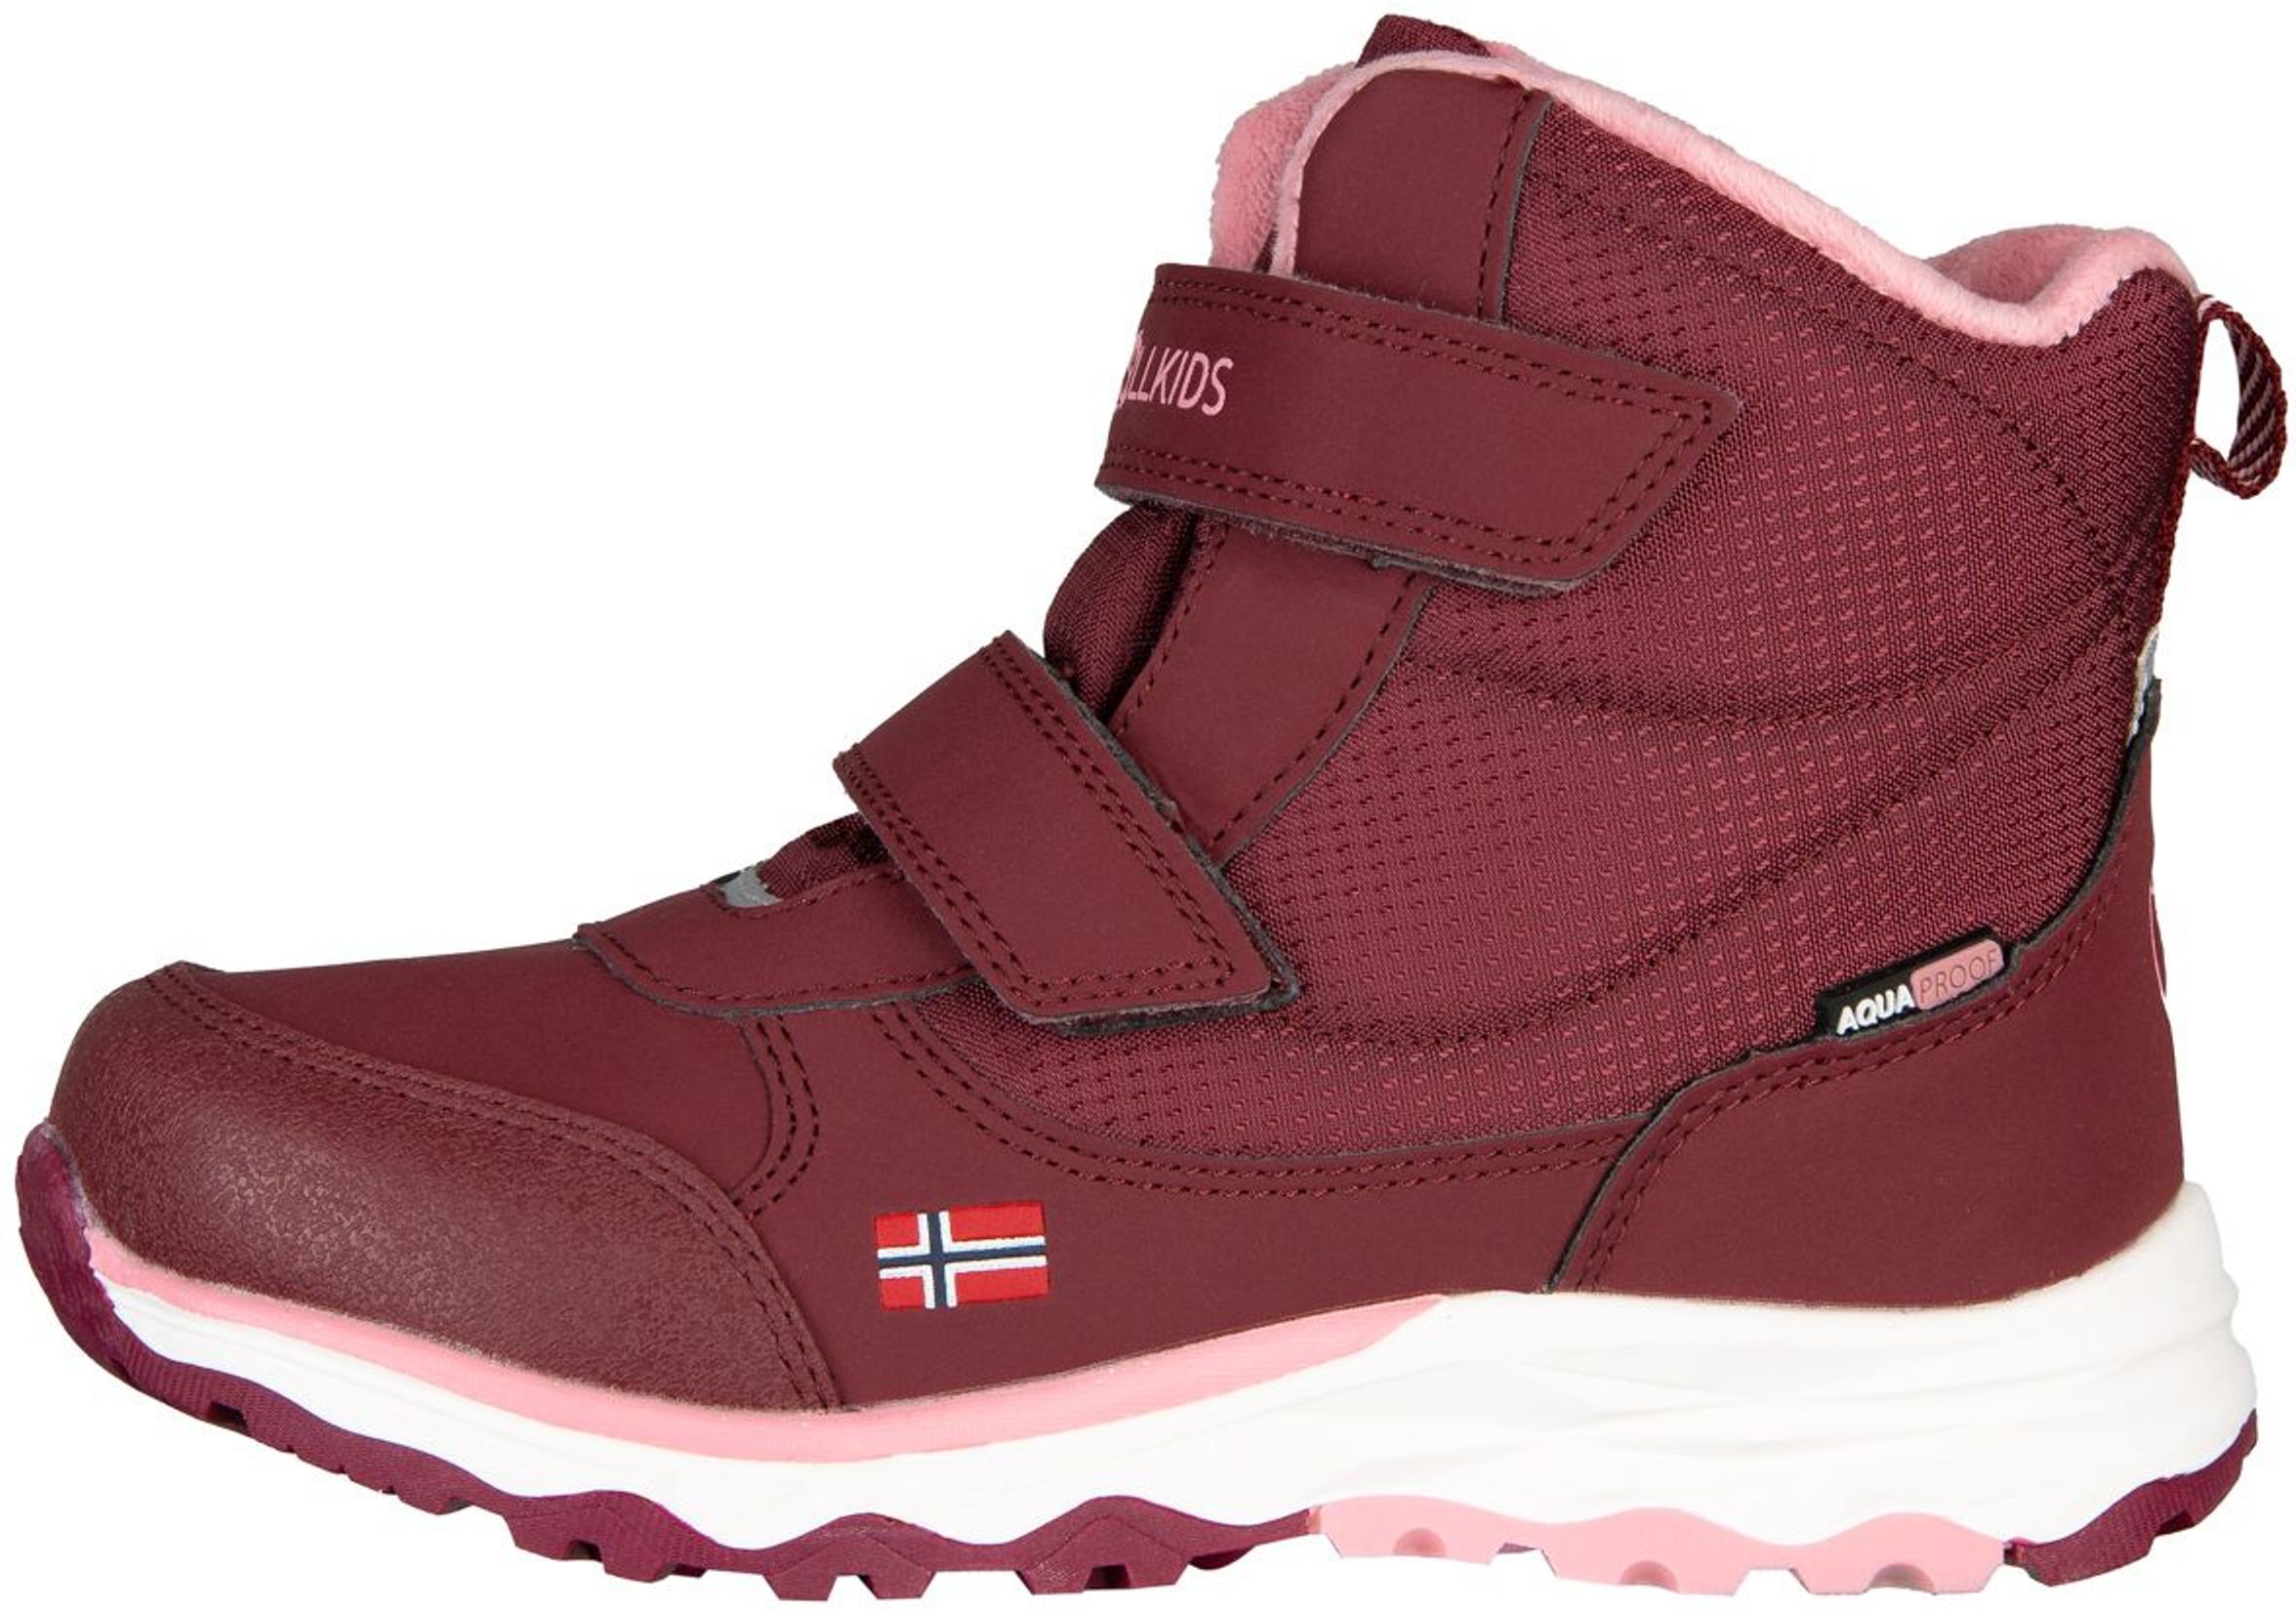 Trollkids Hafjell Winter Boots maroon red/antique rose